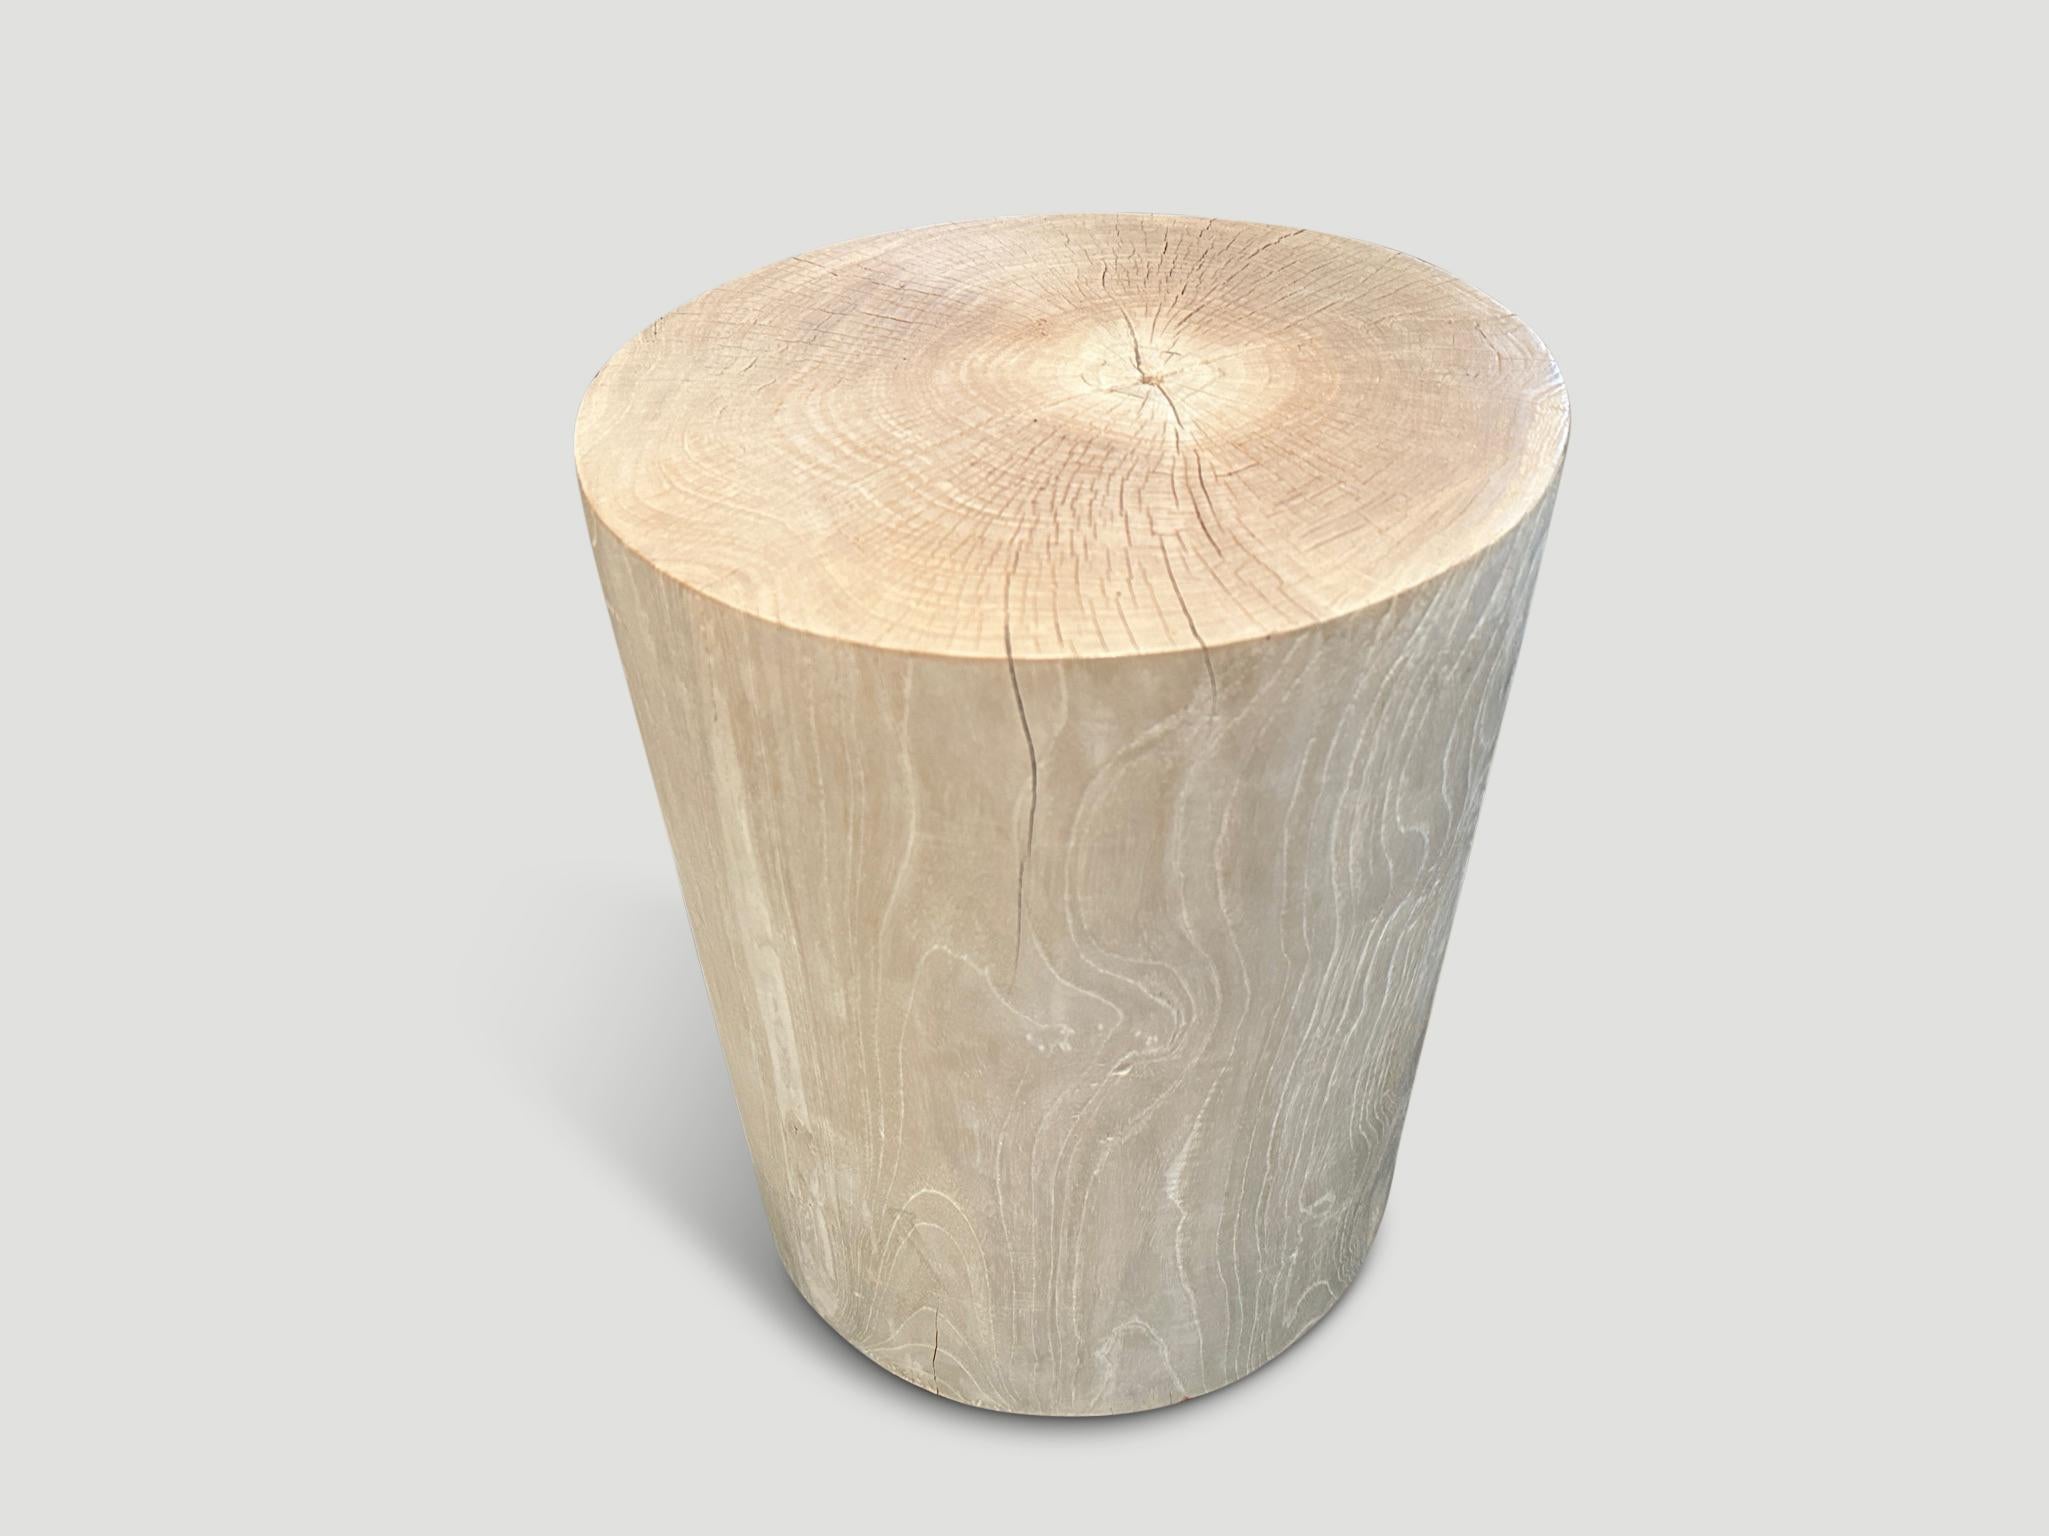 Reclaimed teak wood side table or stool. Bleached and carved into a minimalist cylinder whilst respecting the natural organic wood. Also available charred. We have a collection. Please inquire. The images reflect one.

The St. Barts Collection